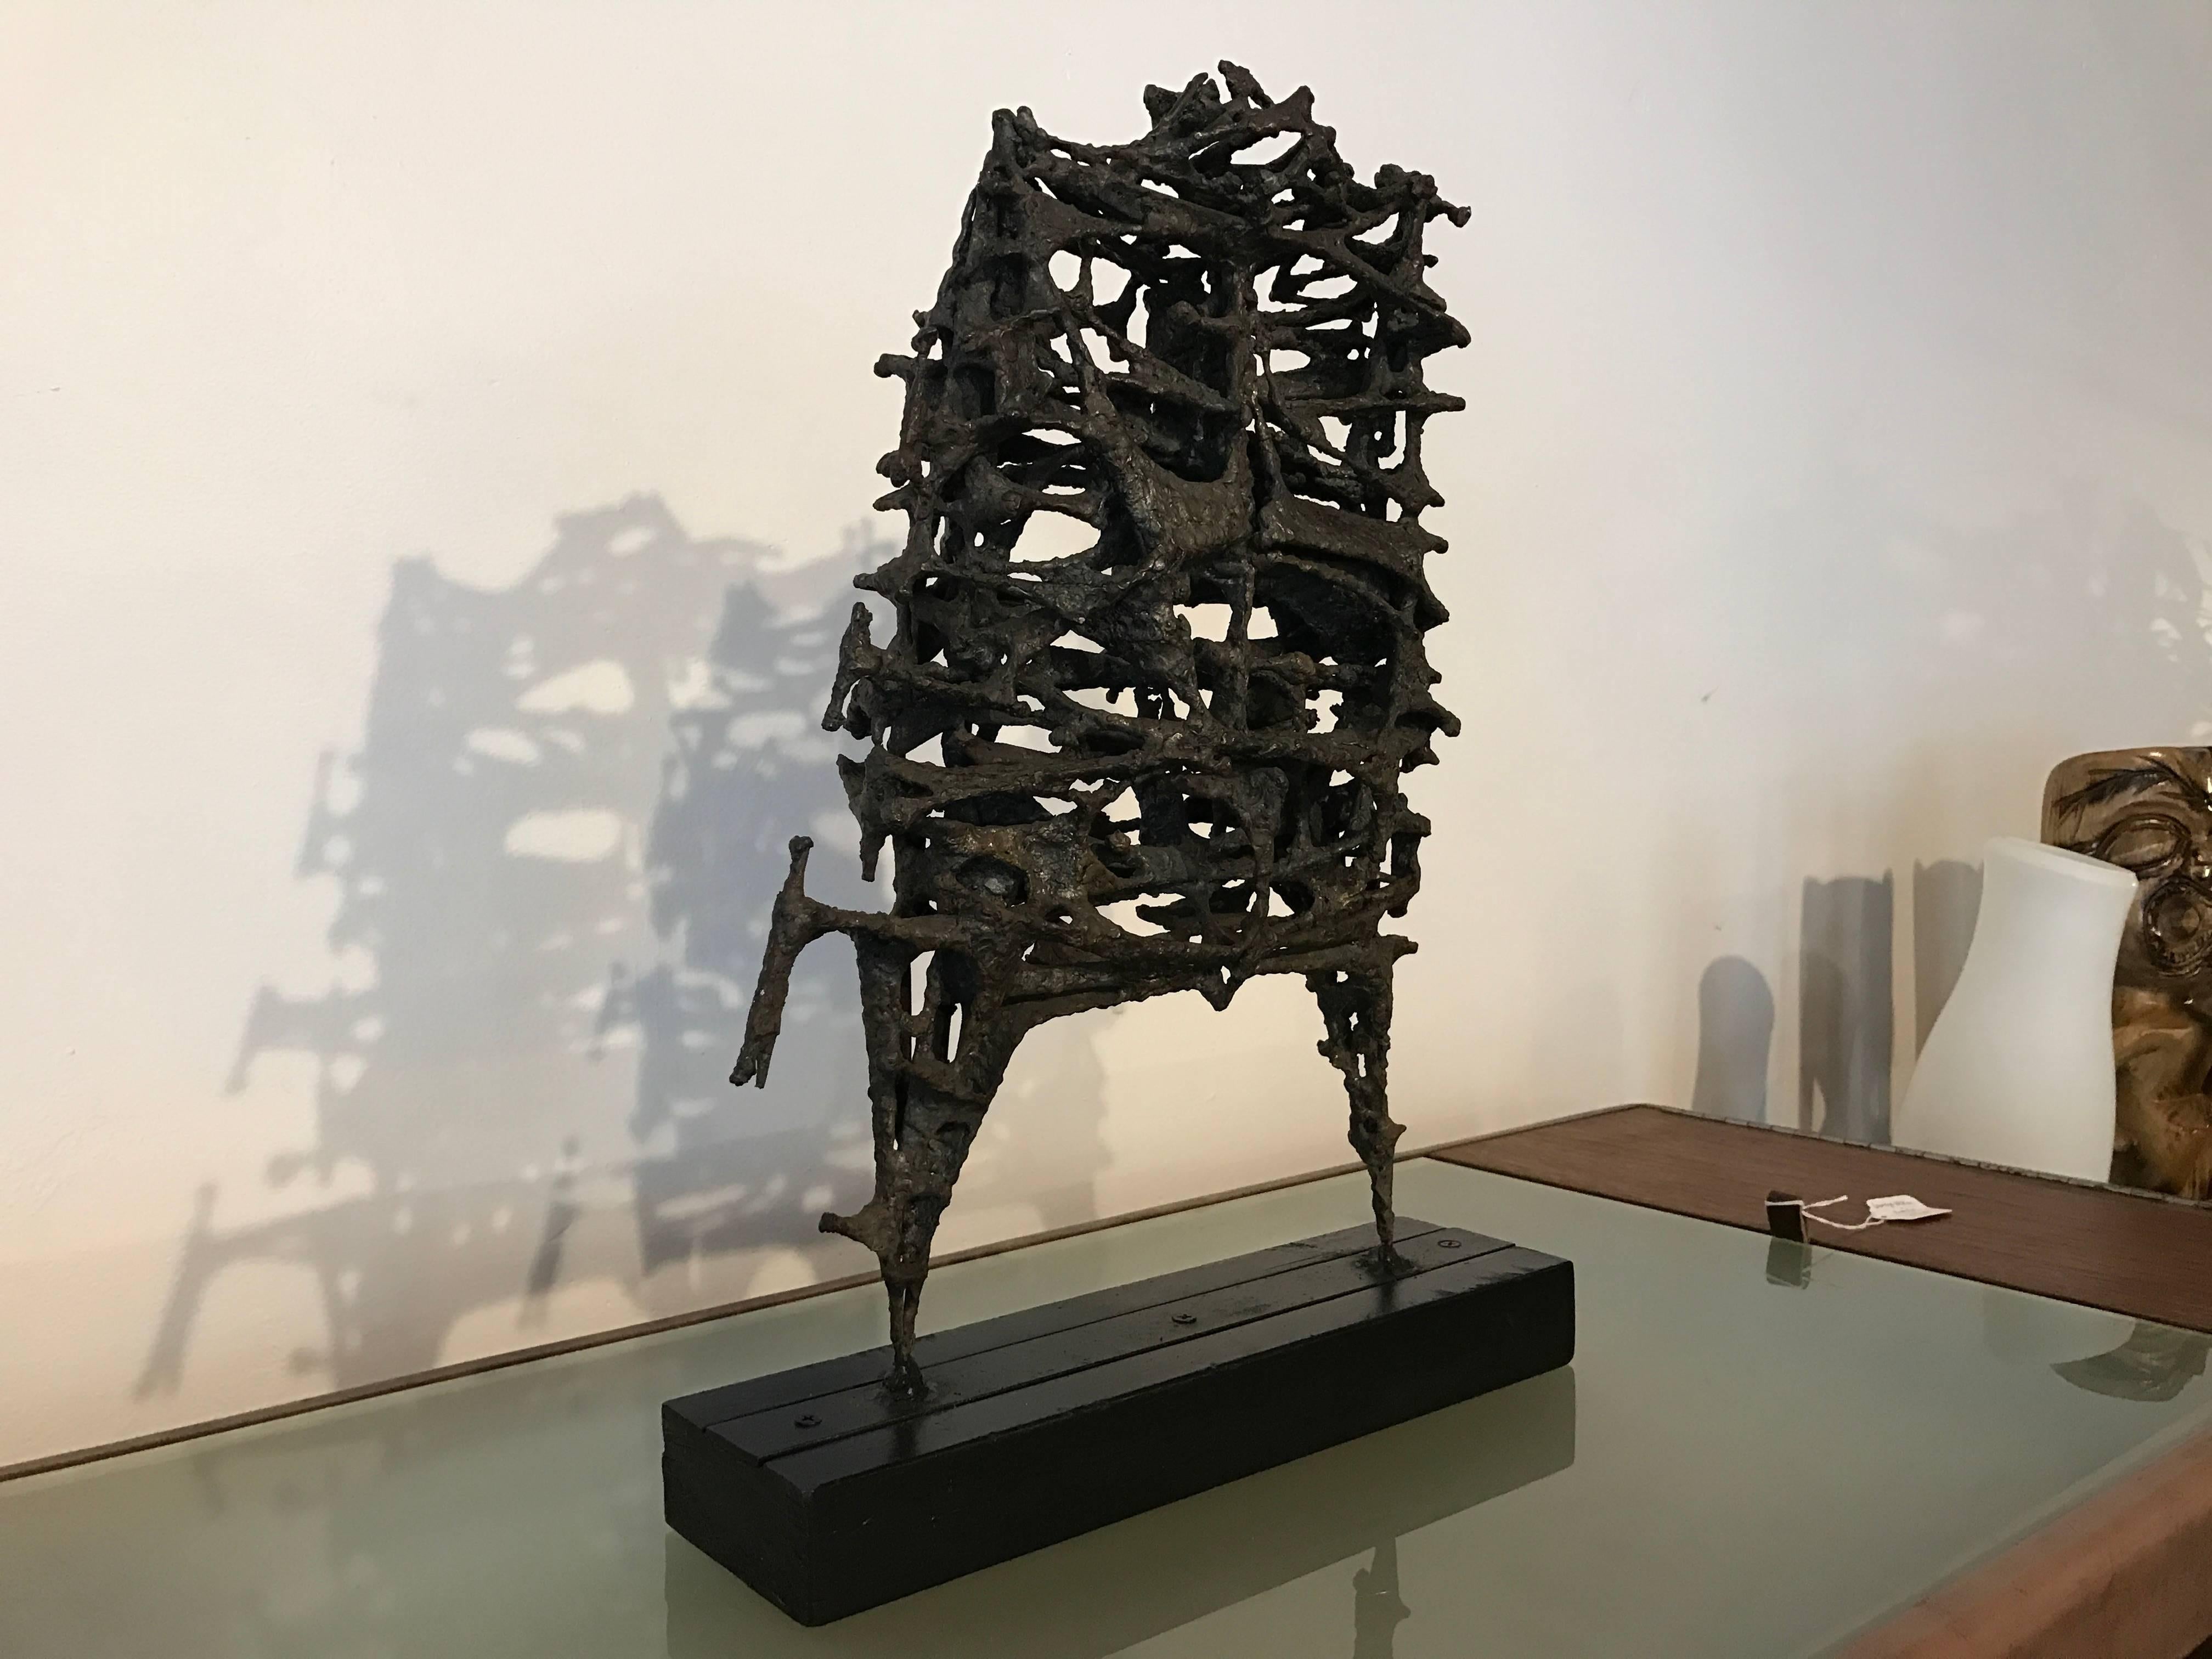 Stunning sculpture from the San Francisco museum of art 1964
all original and in great condition.